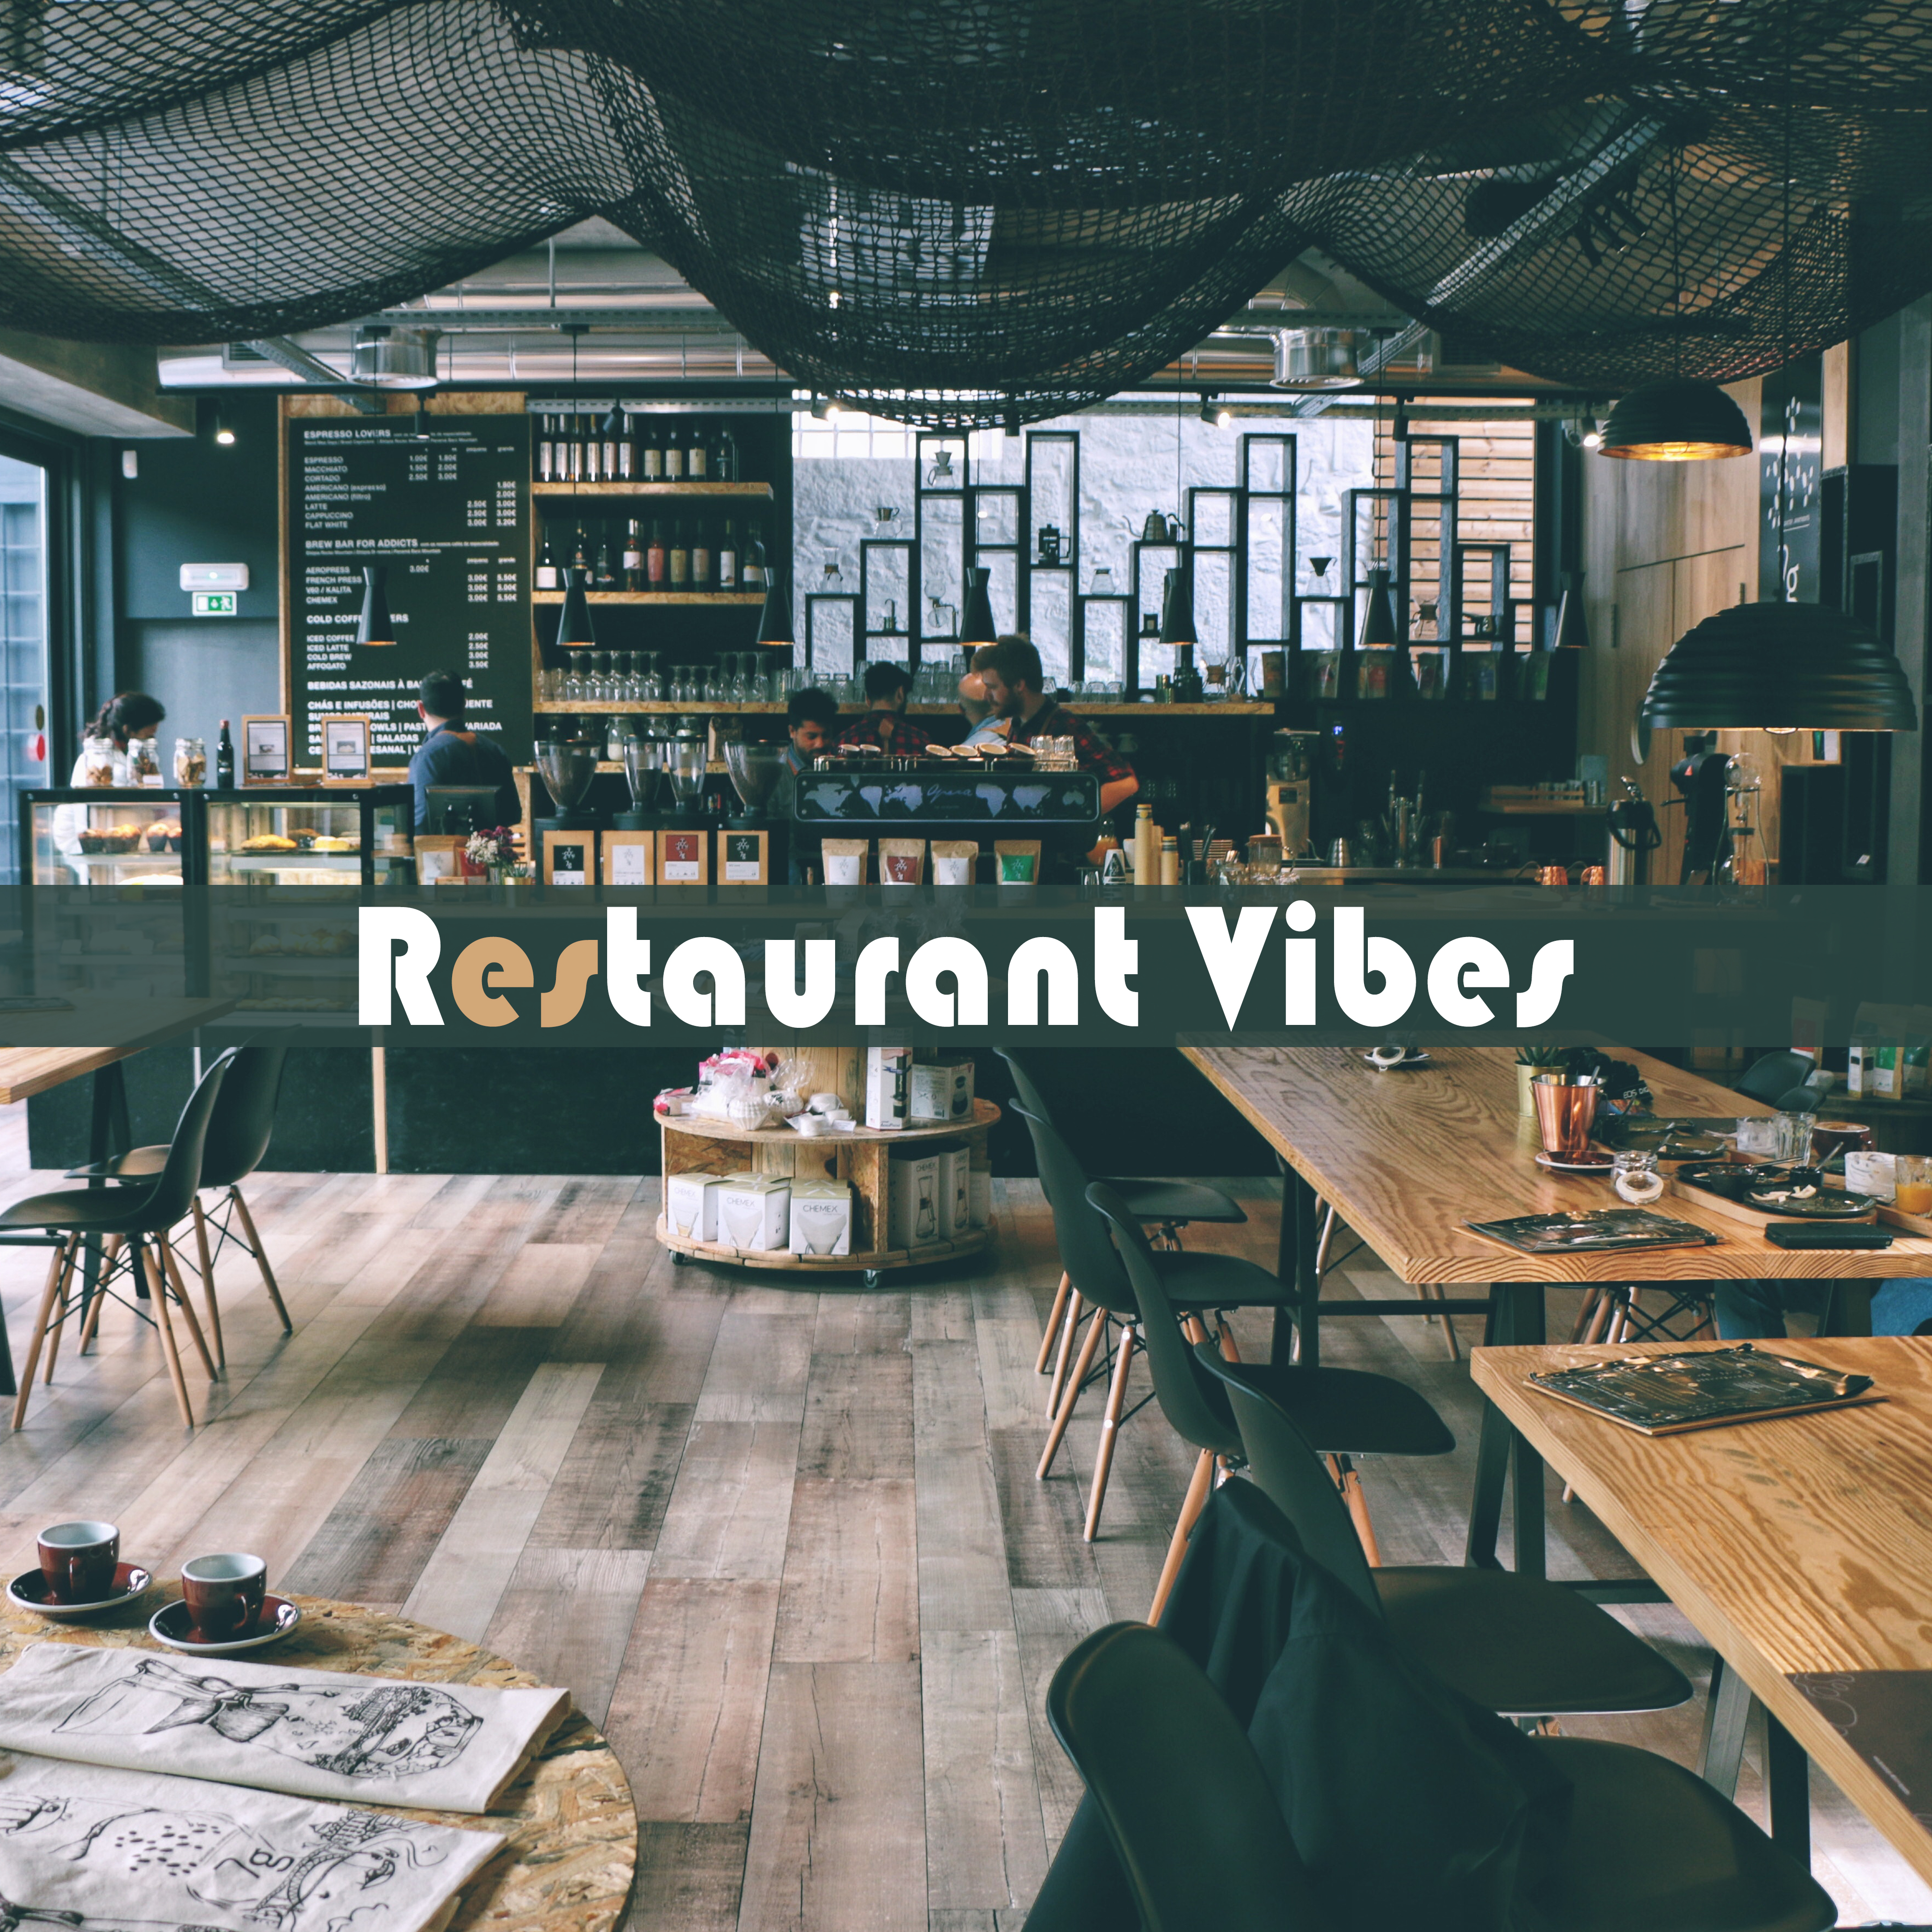 Restaurant Vibes  Dinner Songs, Jazz Relaxation for Coffee, Restaurant, Pure Relaxation, Jazz Lounge 2019, Smooth Jazz Coffee